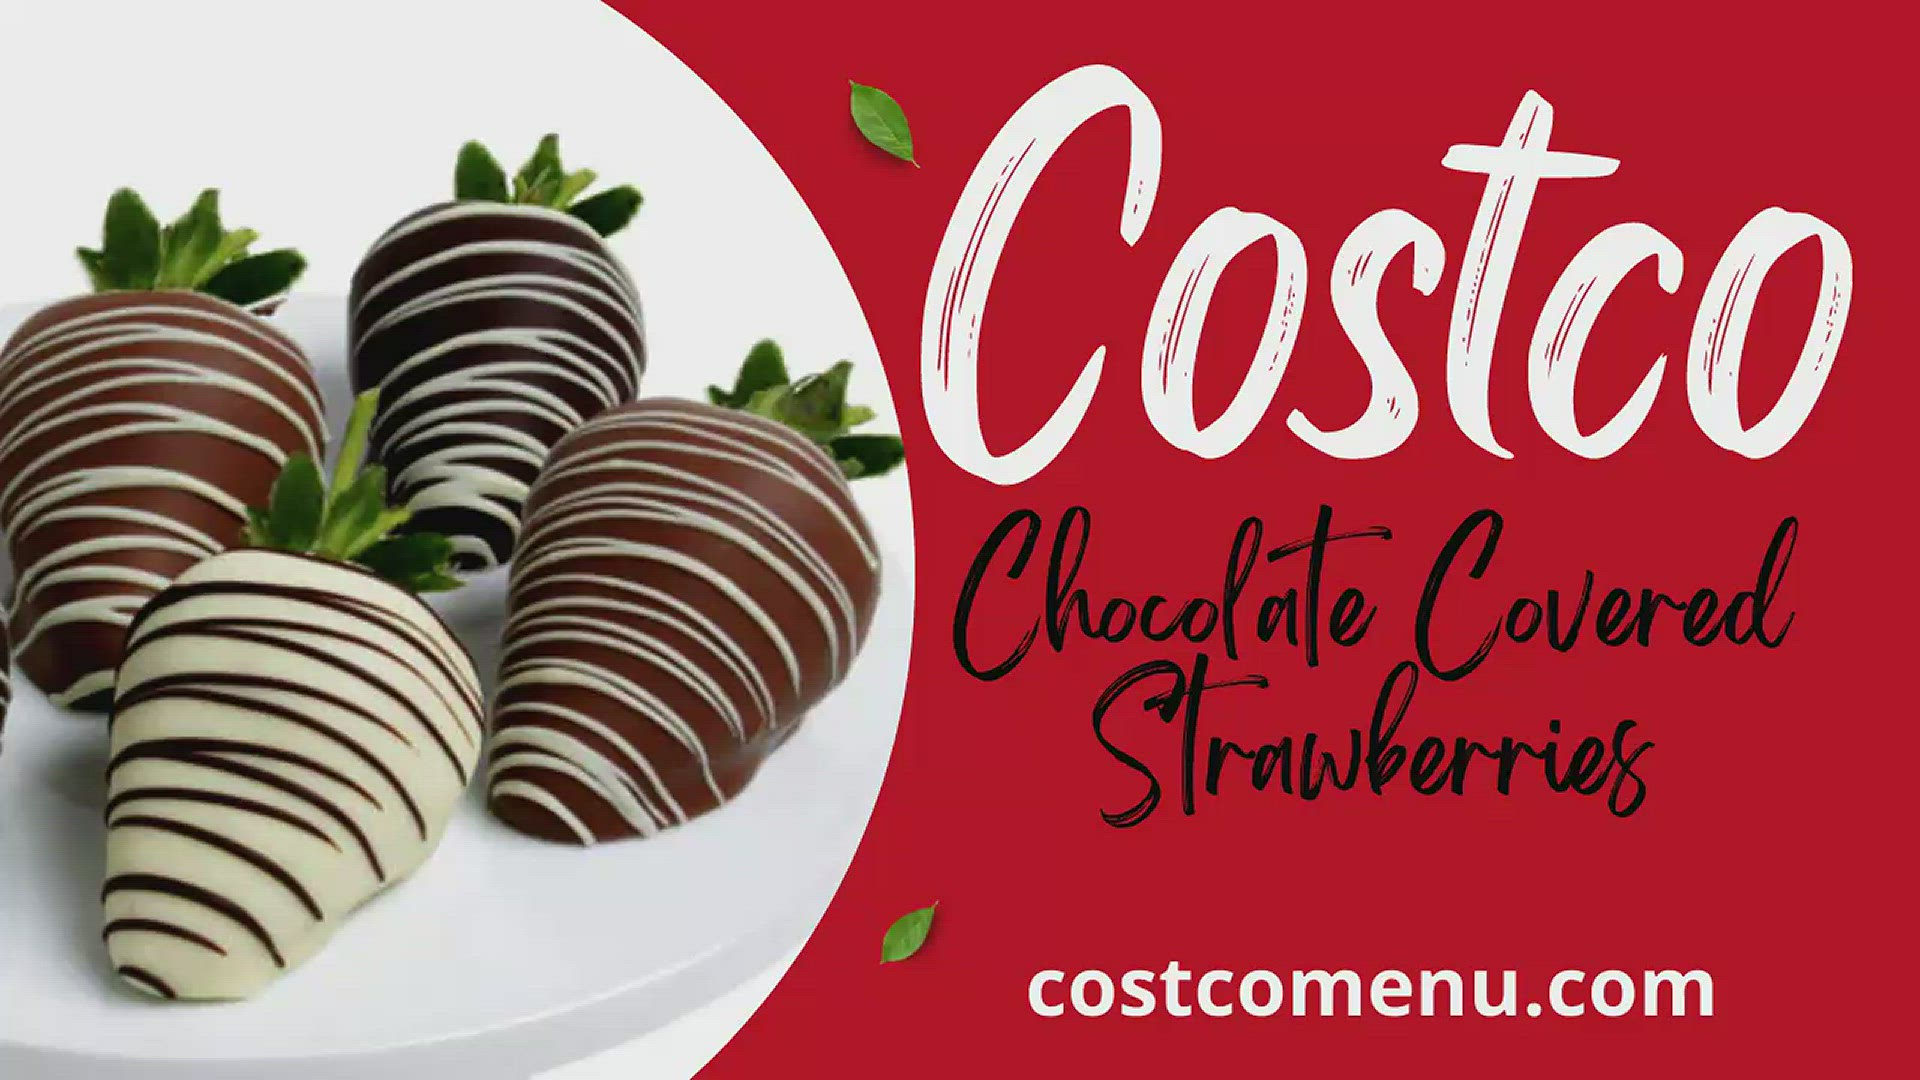 'Video thumbnail for Costco Chocolate Covered Strawberries'